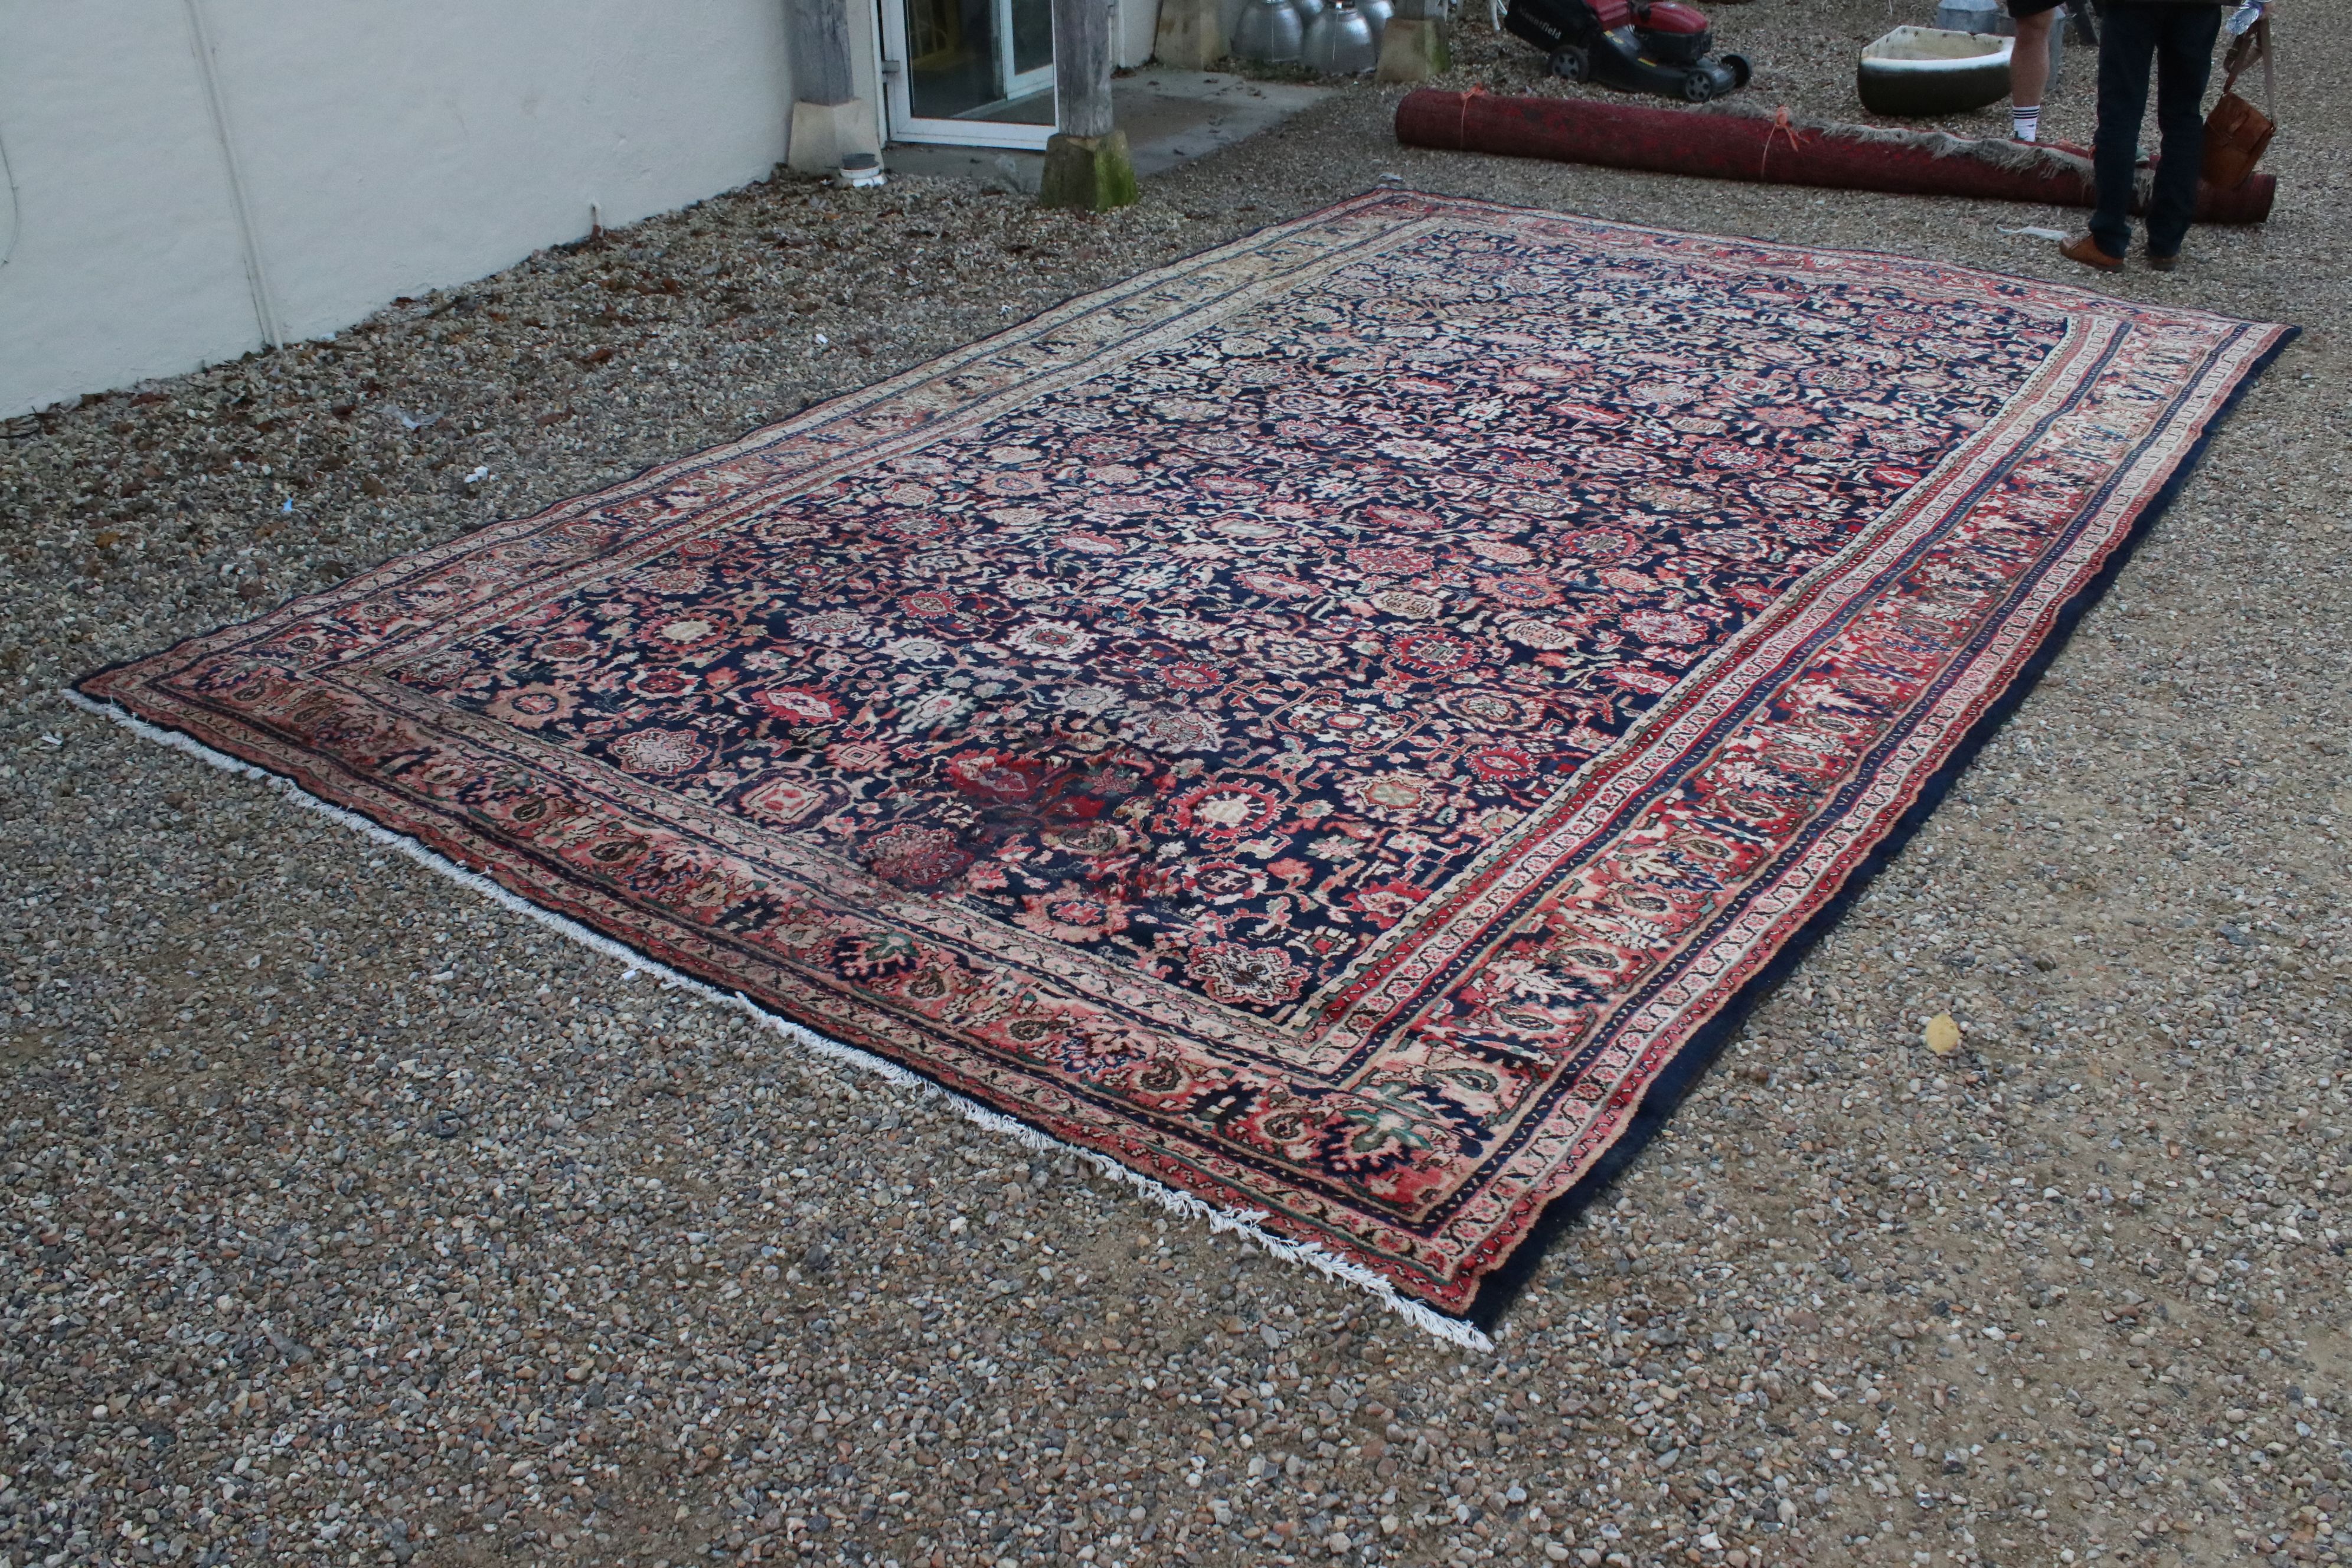 Large Wool Rug, multi coloured pattern on a blue ground within a border, 528cms x 310cms